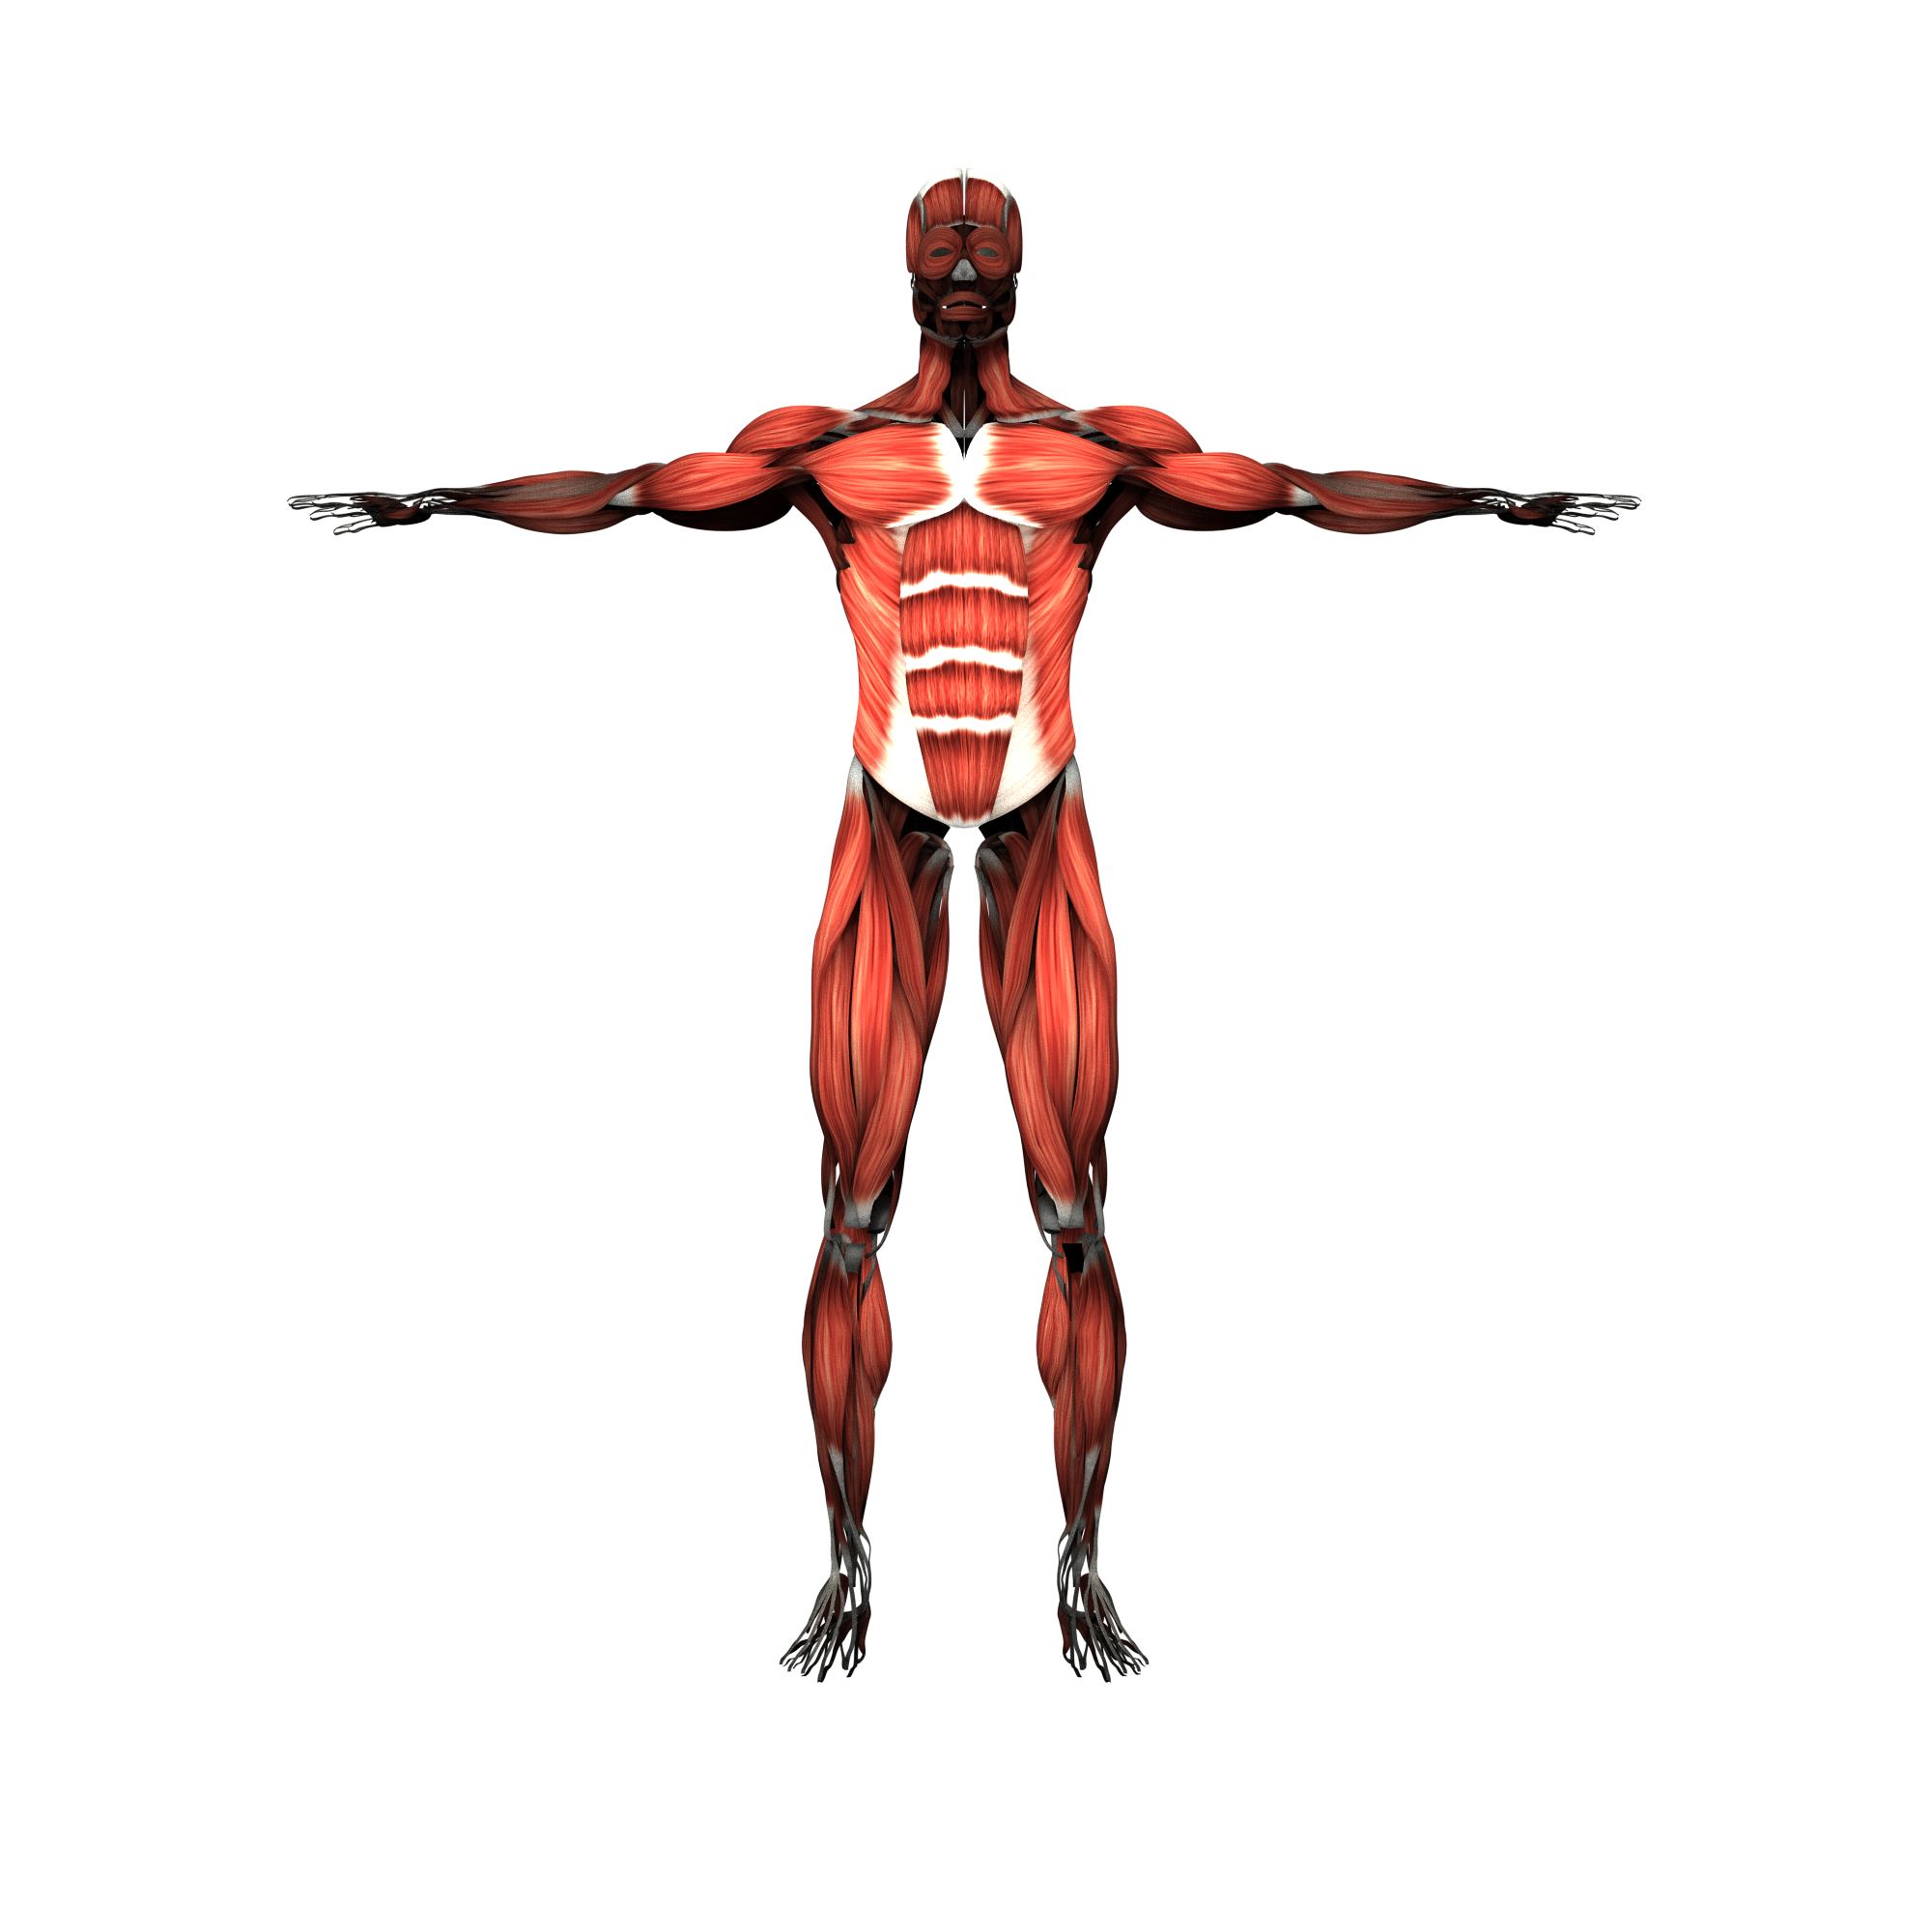 muscles clipart skeletal muscle